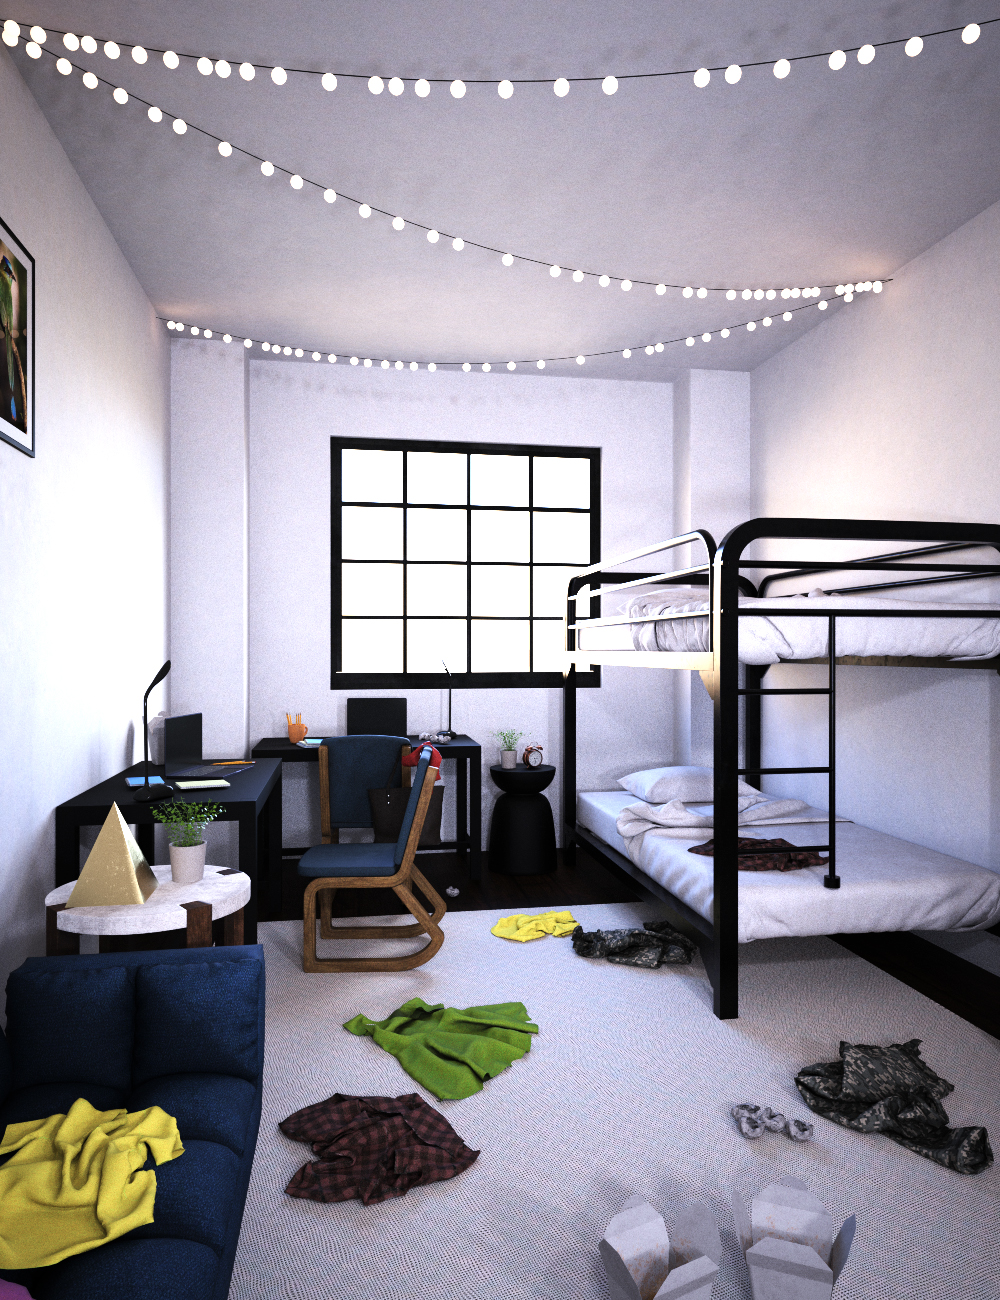 Messy Dorm by: Charlie, 3D Models by Daz 3D